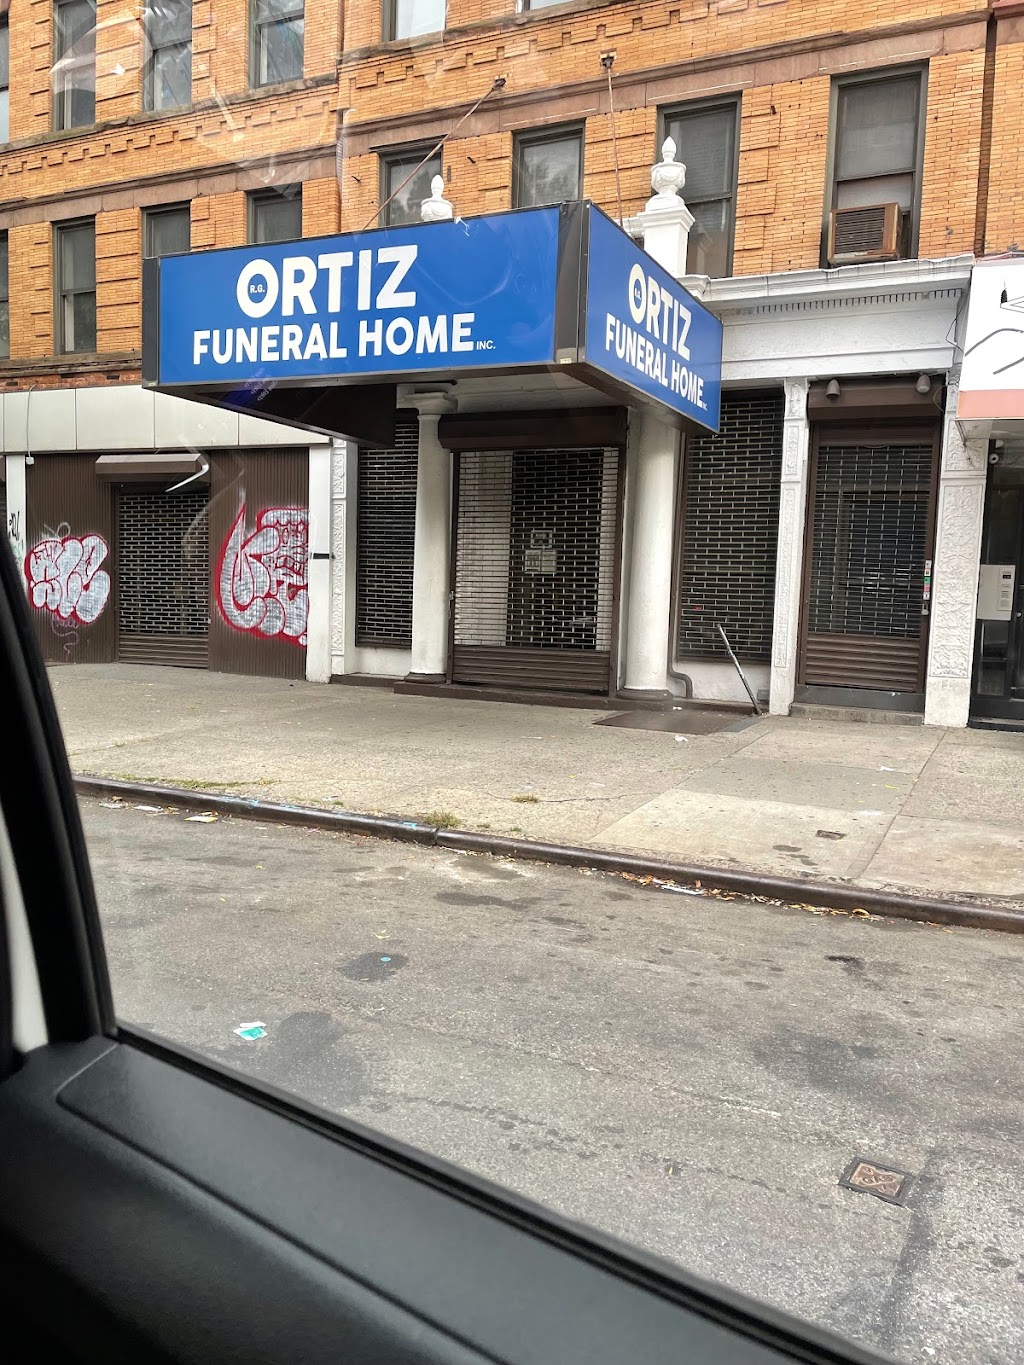 R G Ortiz Funeral Home | 310 Willis Ave, The Bronx, NY 10454 | Phone: (718) 585-6666